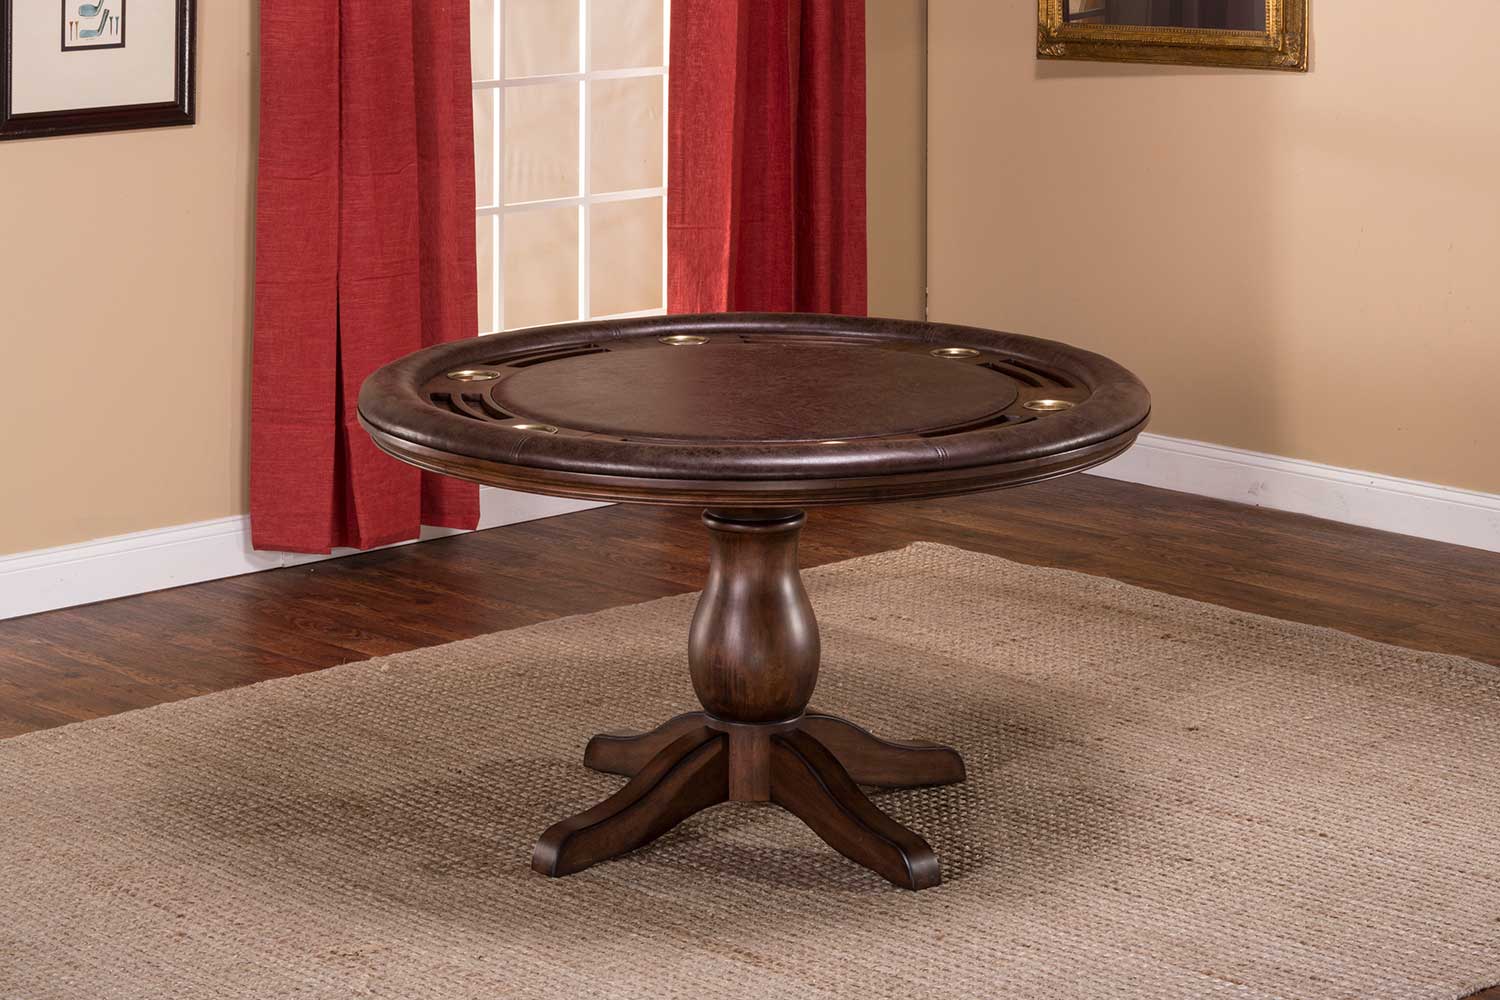 Hillsdale Chiswick Game Table - Brown Cherry